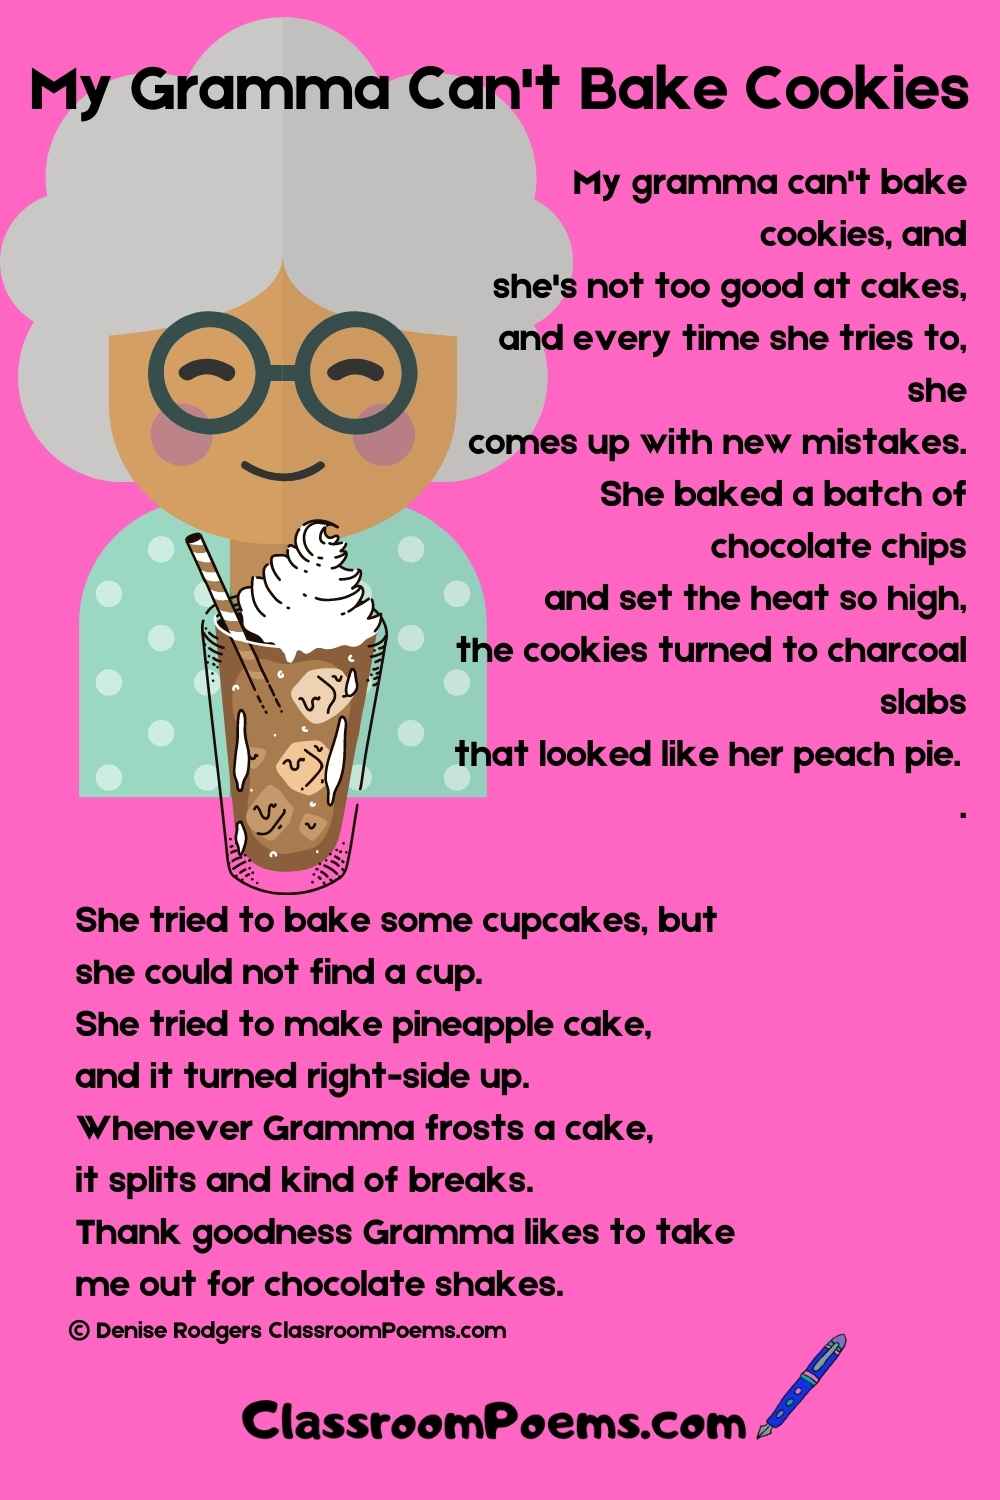 MY GRAMMA CAN'T BAKE COOKIES poem. Family poems by Denise Rodgers on ClassroomPoems.com.